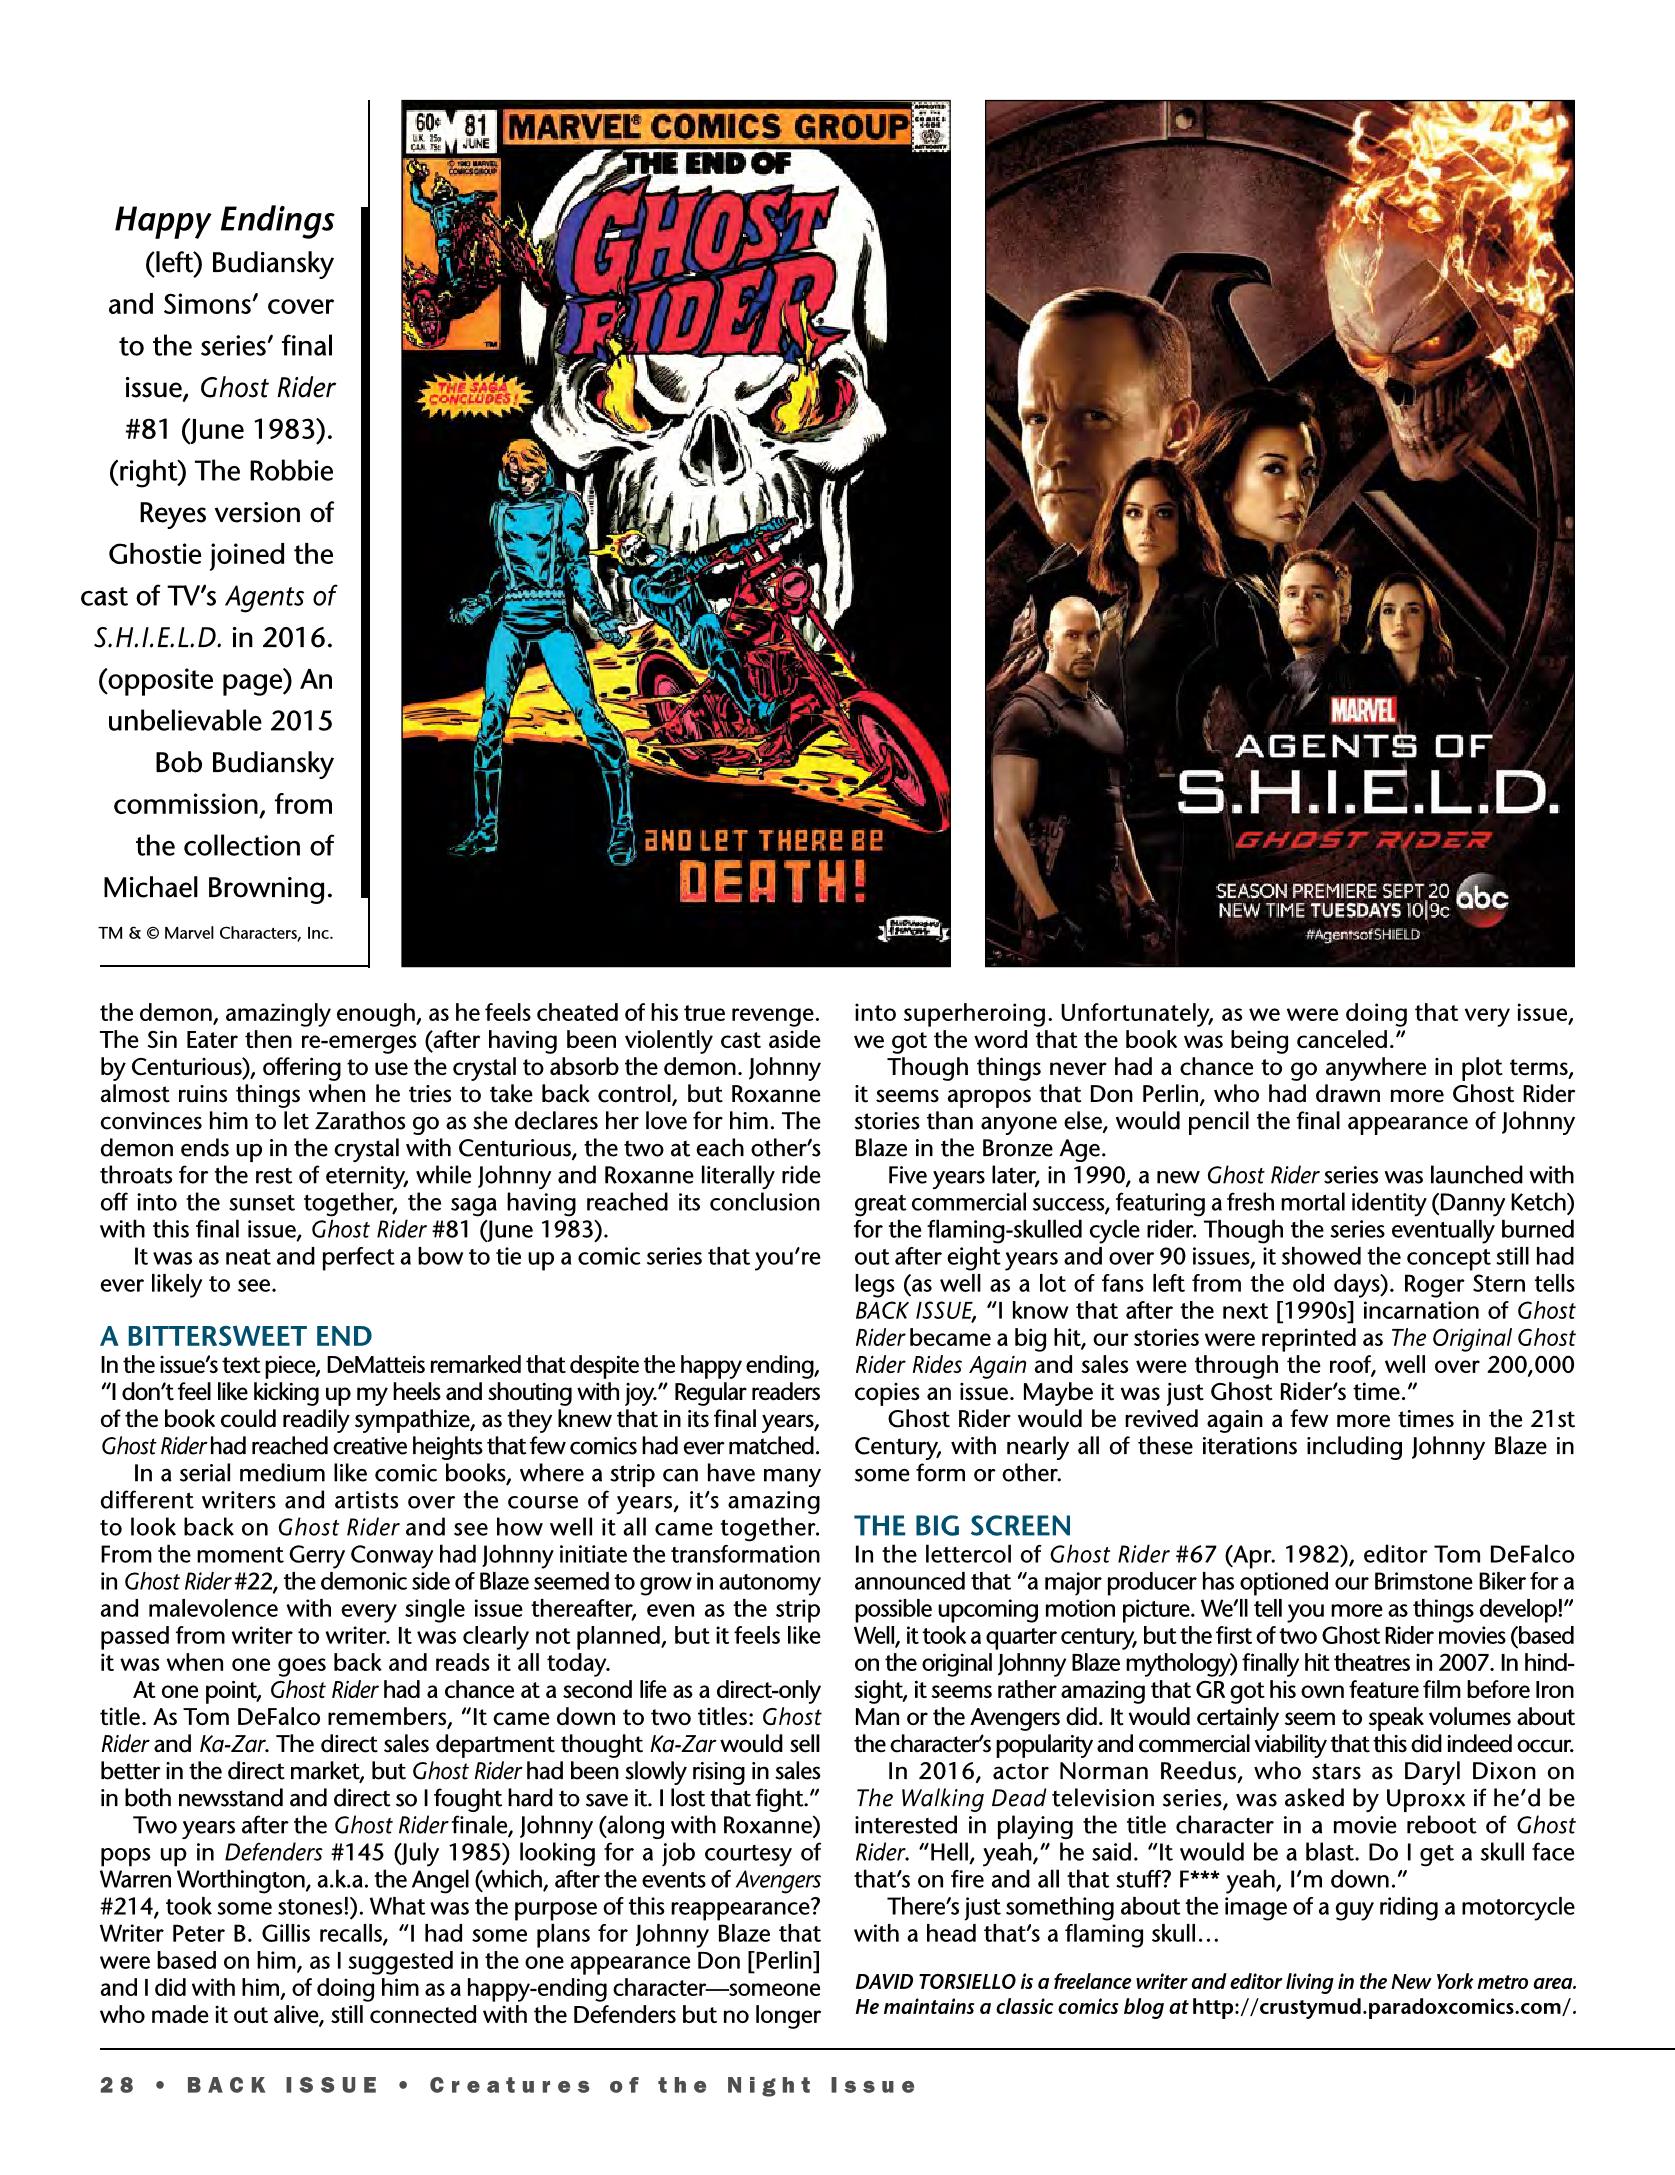 Read online Back Issue comic -  Issue #95 - 24